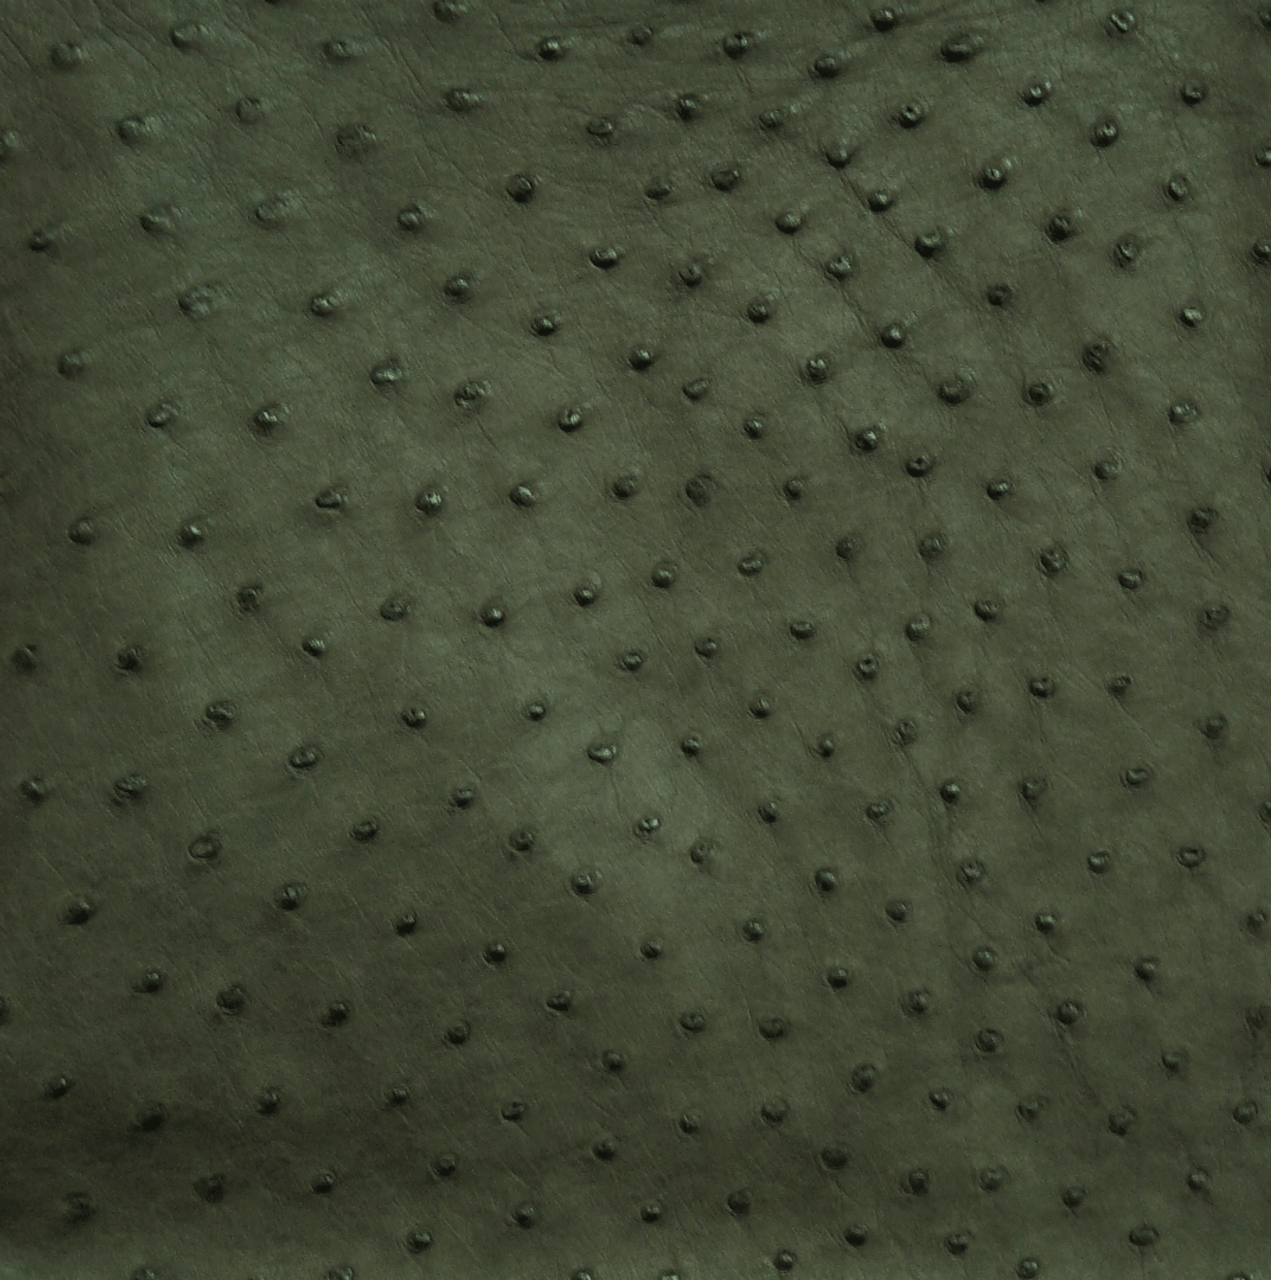 Ostrich Skin Leather - FOREST GREEN SF - 15.9305 sq ft - Grade 2